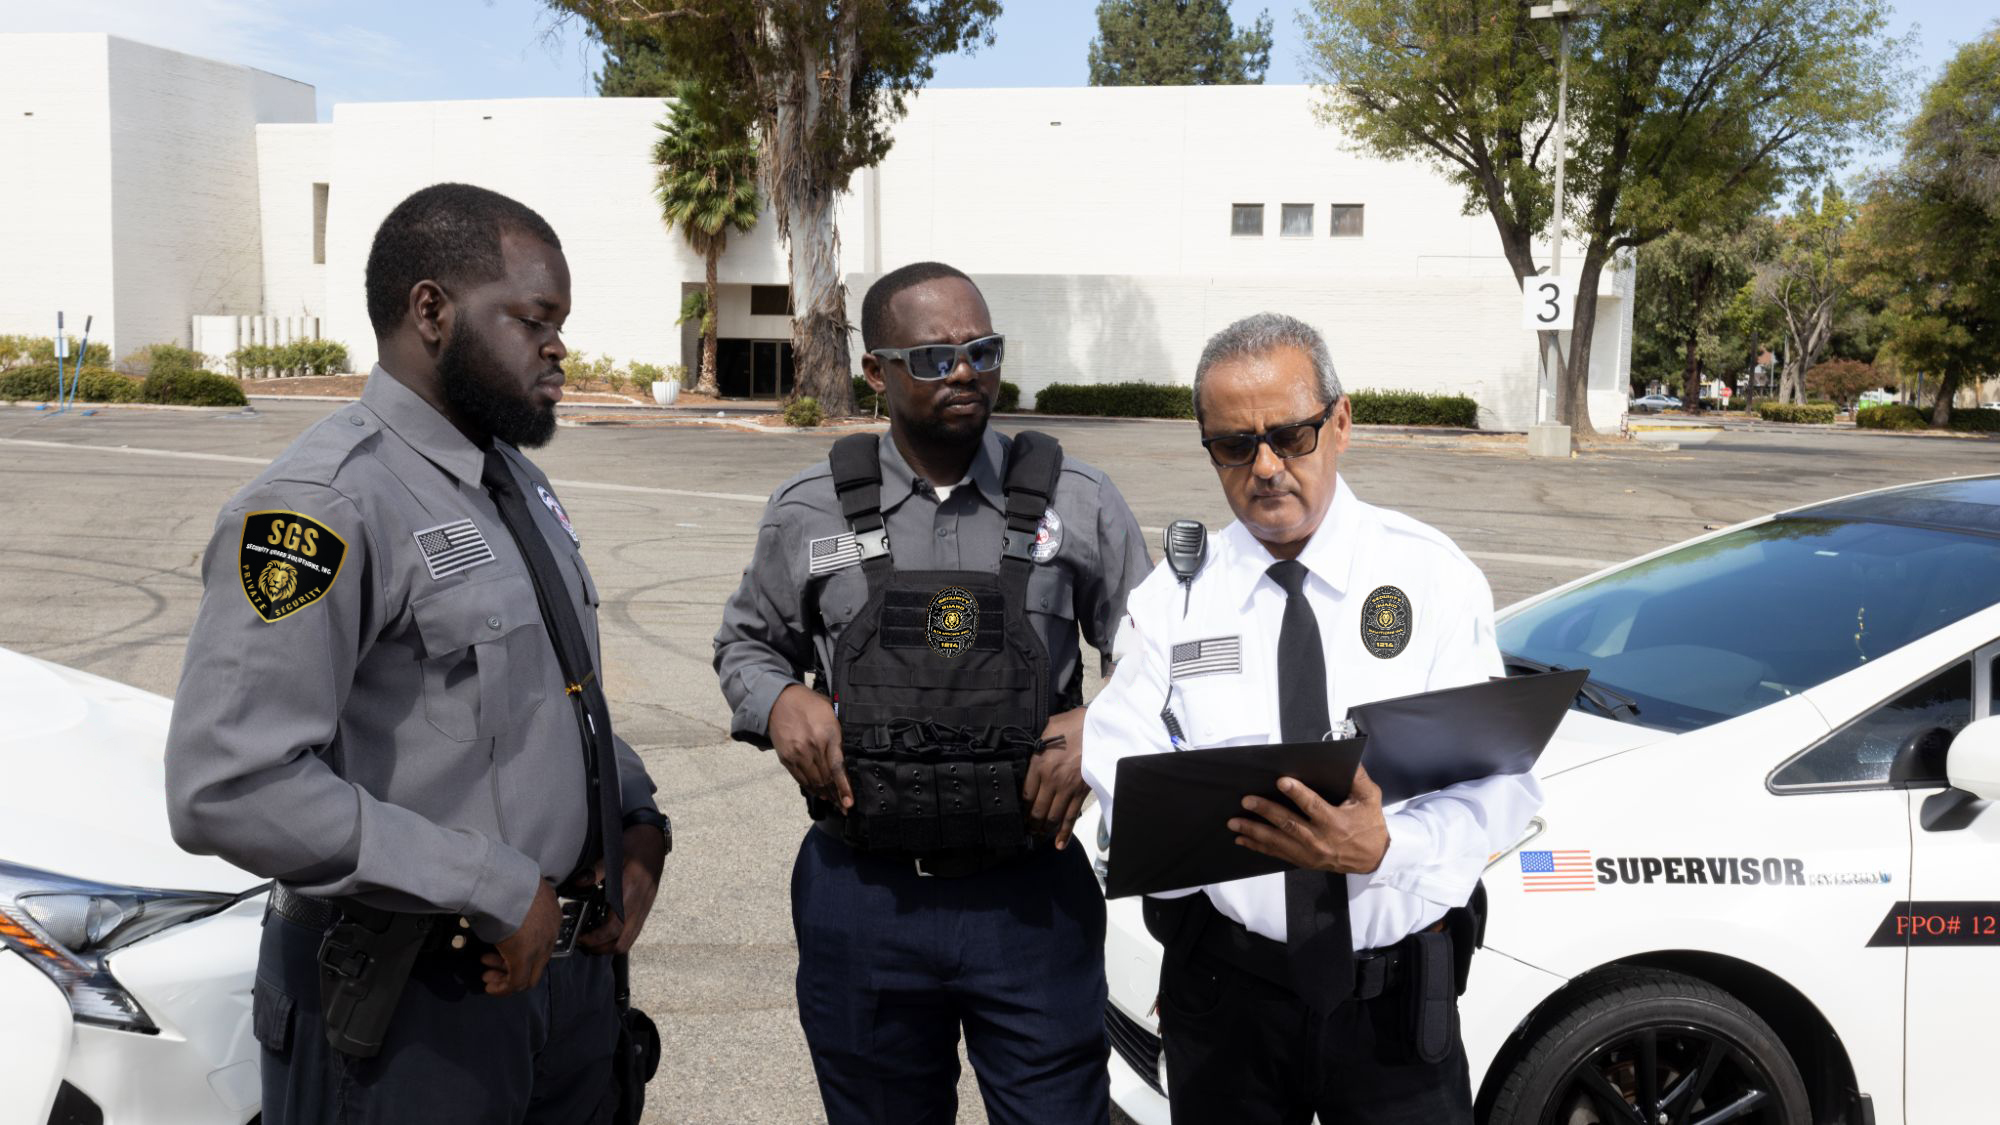 Security officer giving instructions to two security guards